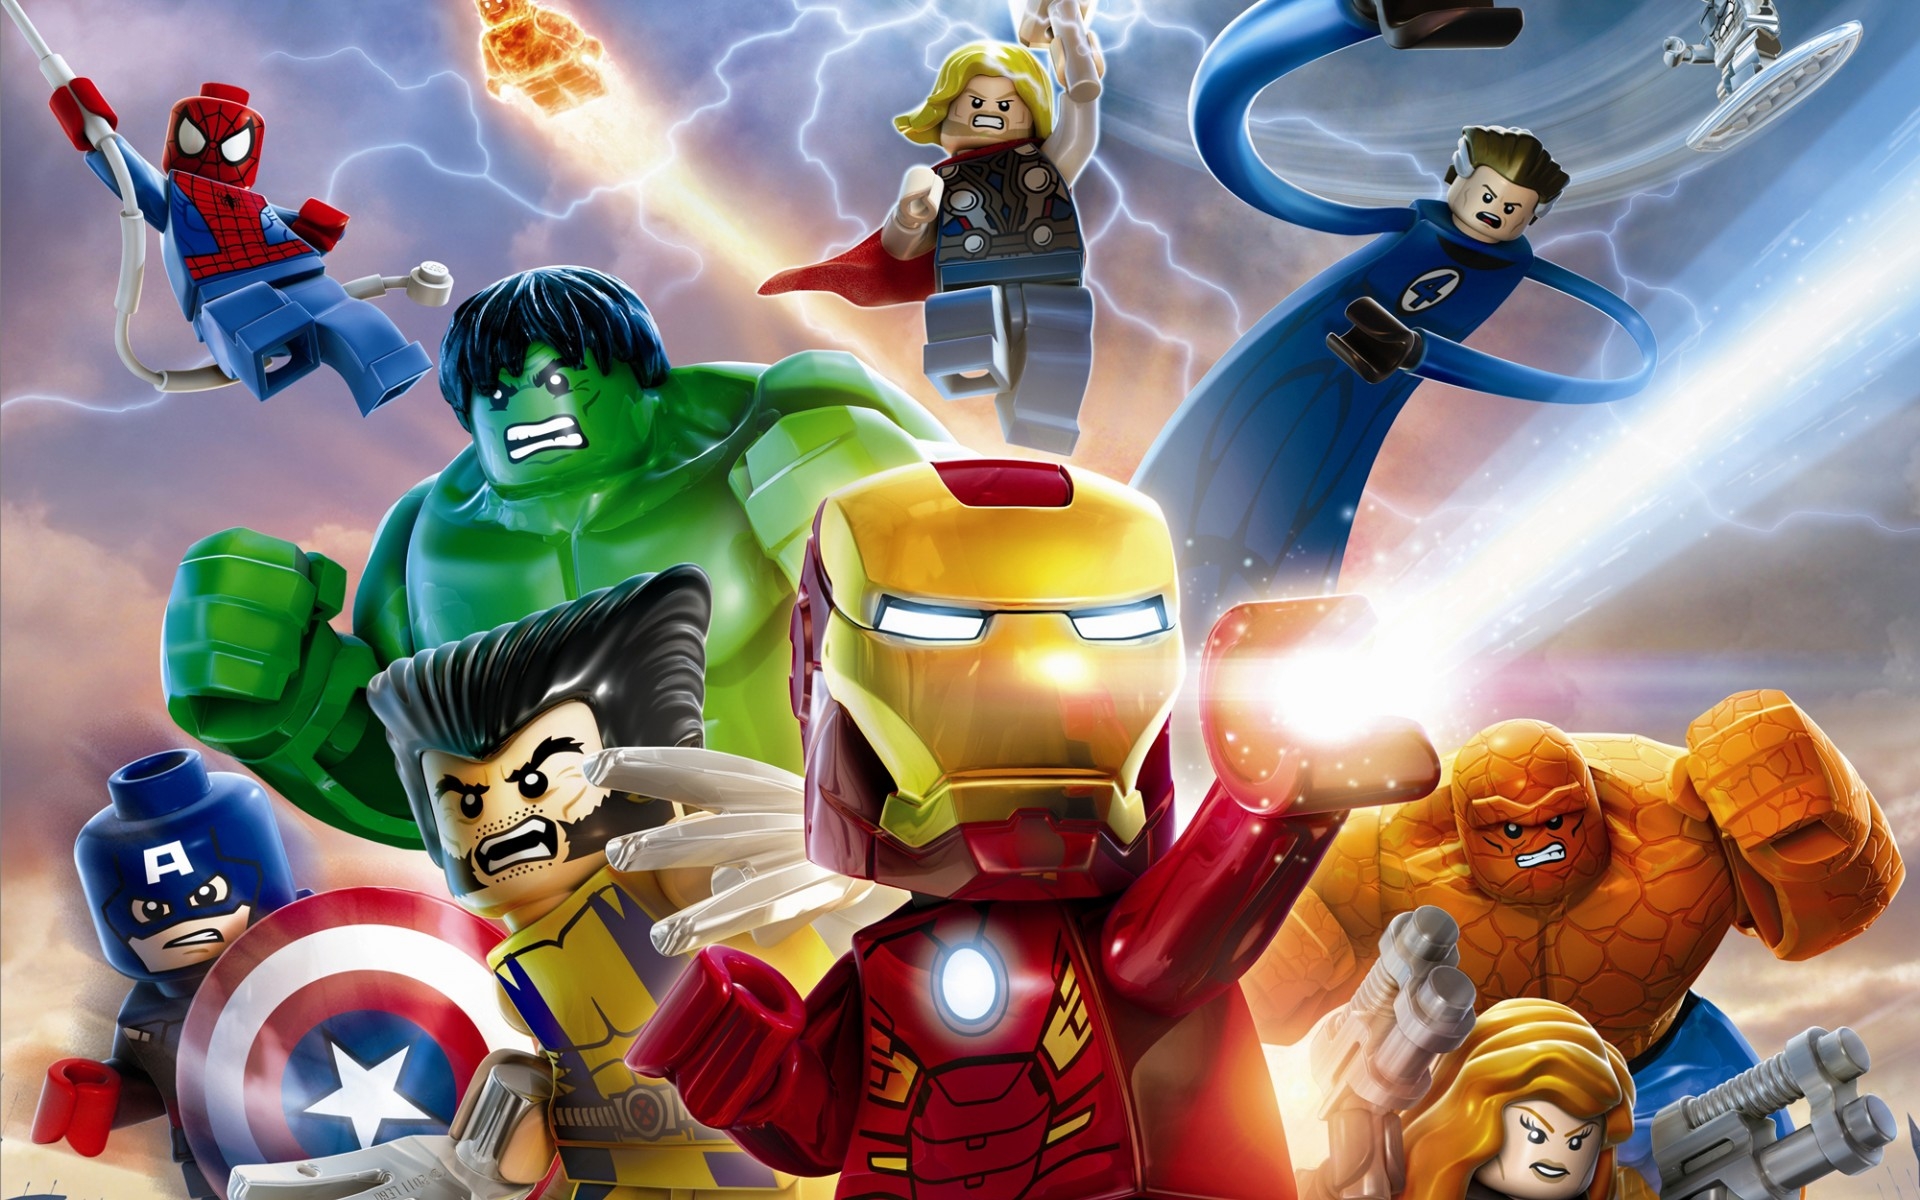 lego, lego marvel super heroes, video game, black widow, captain america, hulk, human torch (marvel comics), iron man, peter parker, reed richards, silver surfer, spider man, thing (marvel comics), thor, wolverine